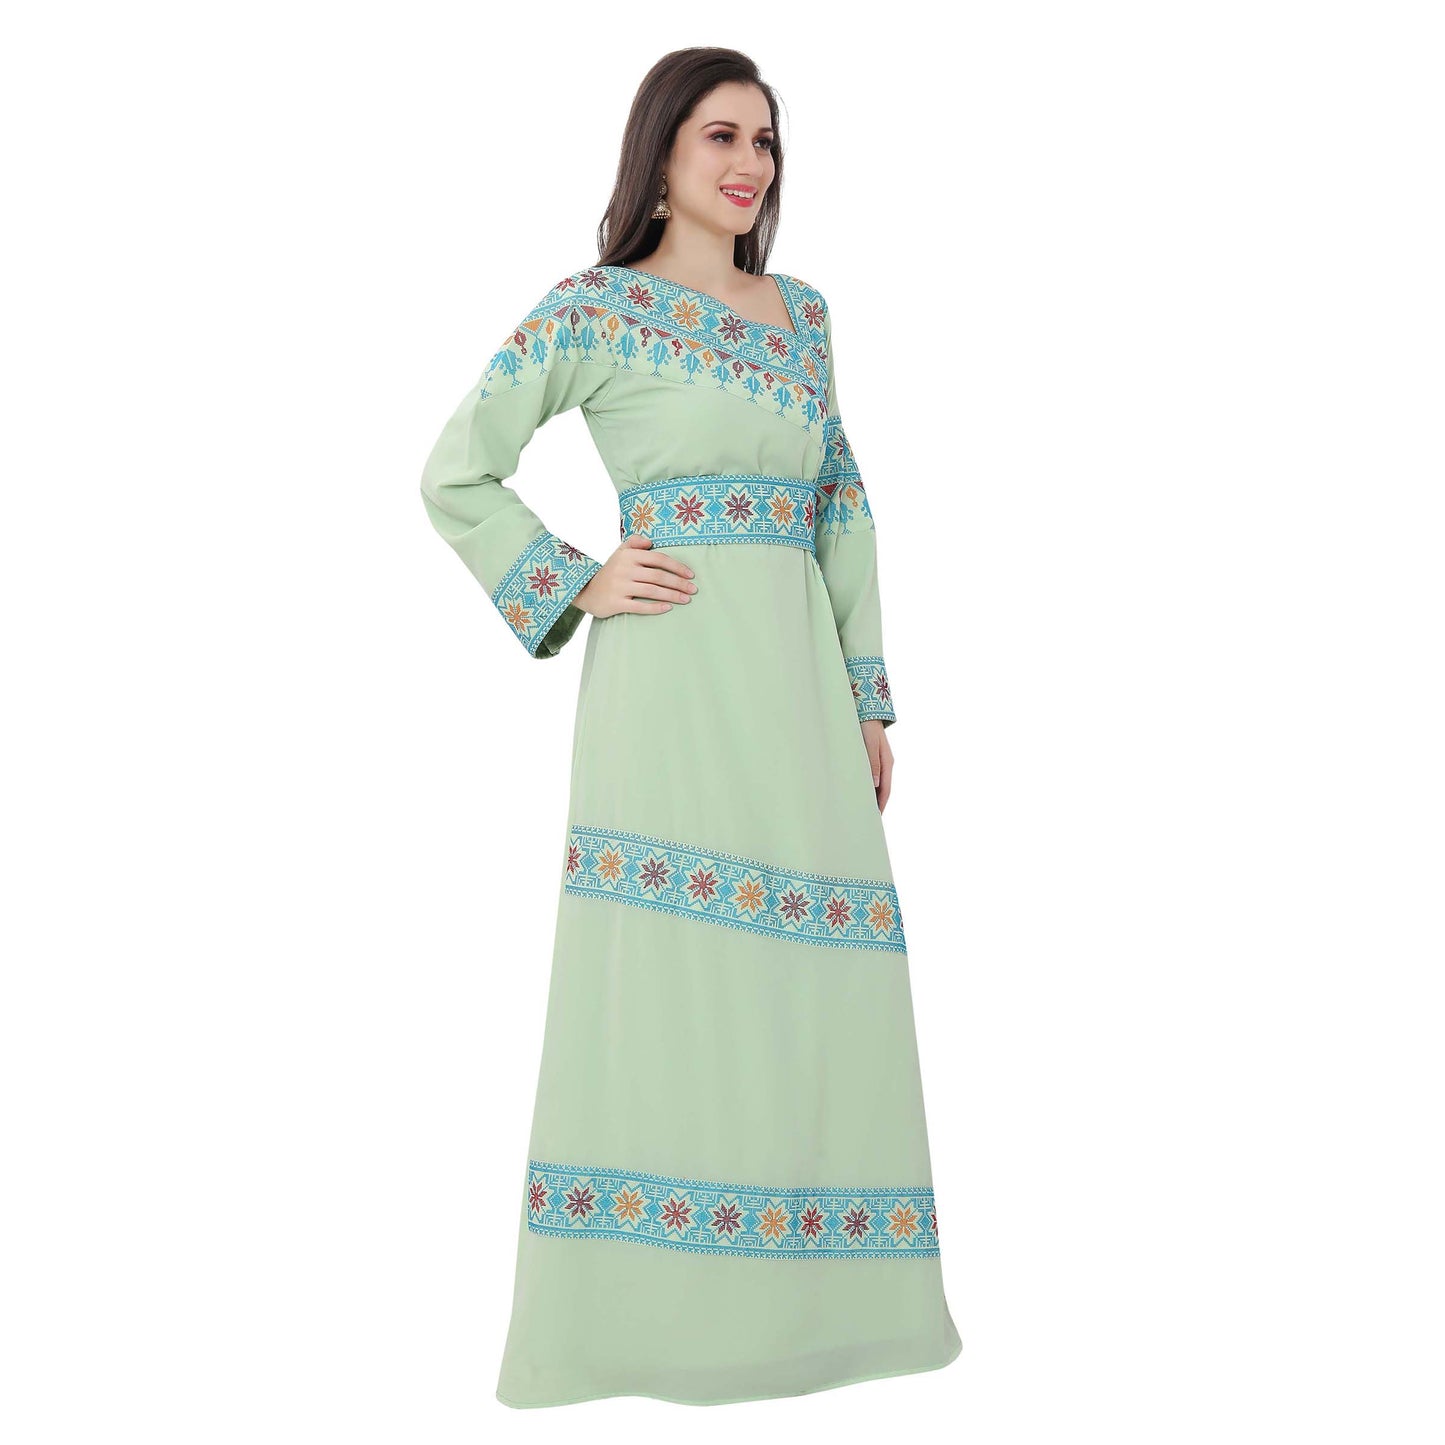 Load image into Gallery viewer, Designer Palestine Thobe Caftan with Colorful Cross Stitch Embroidery - Maxim Creation
